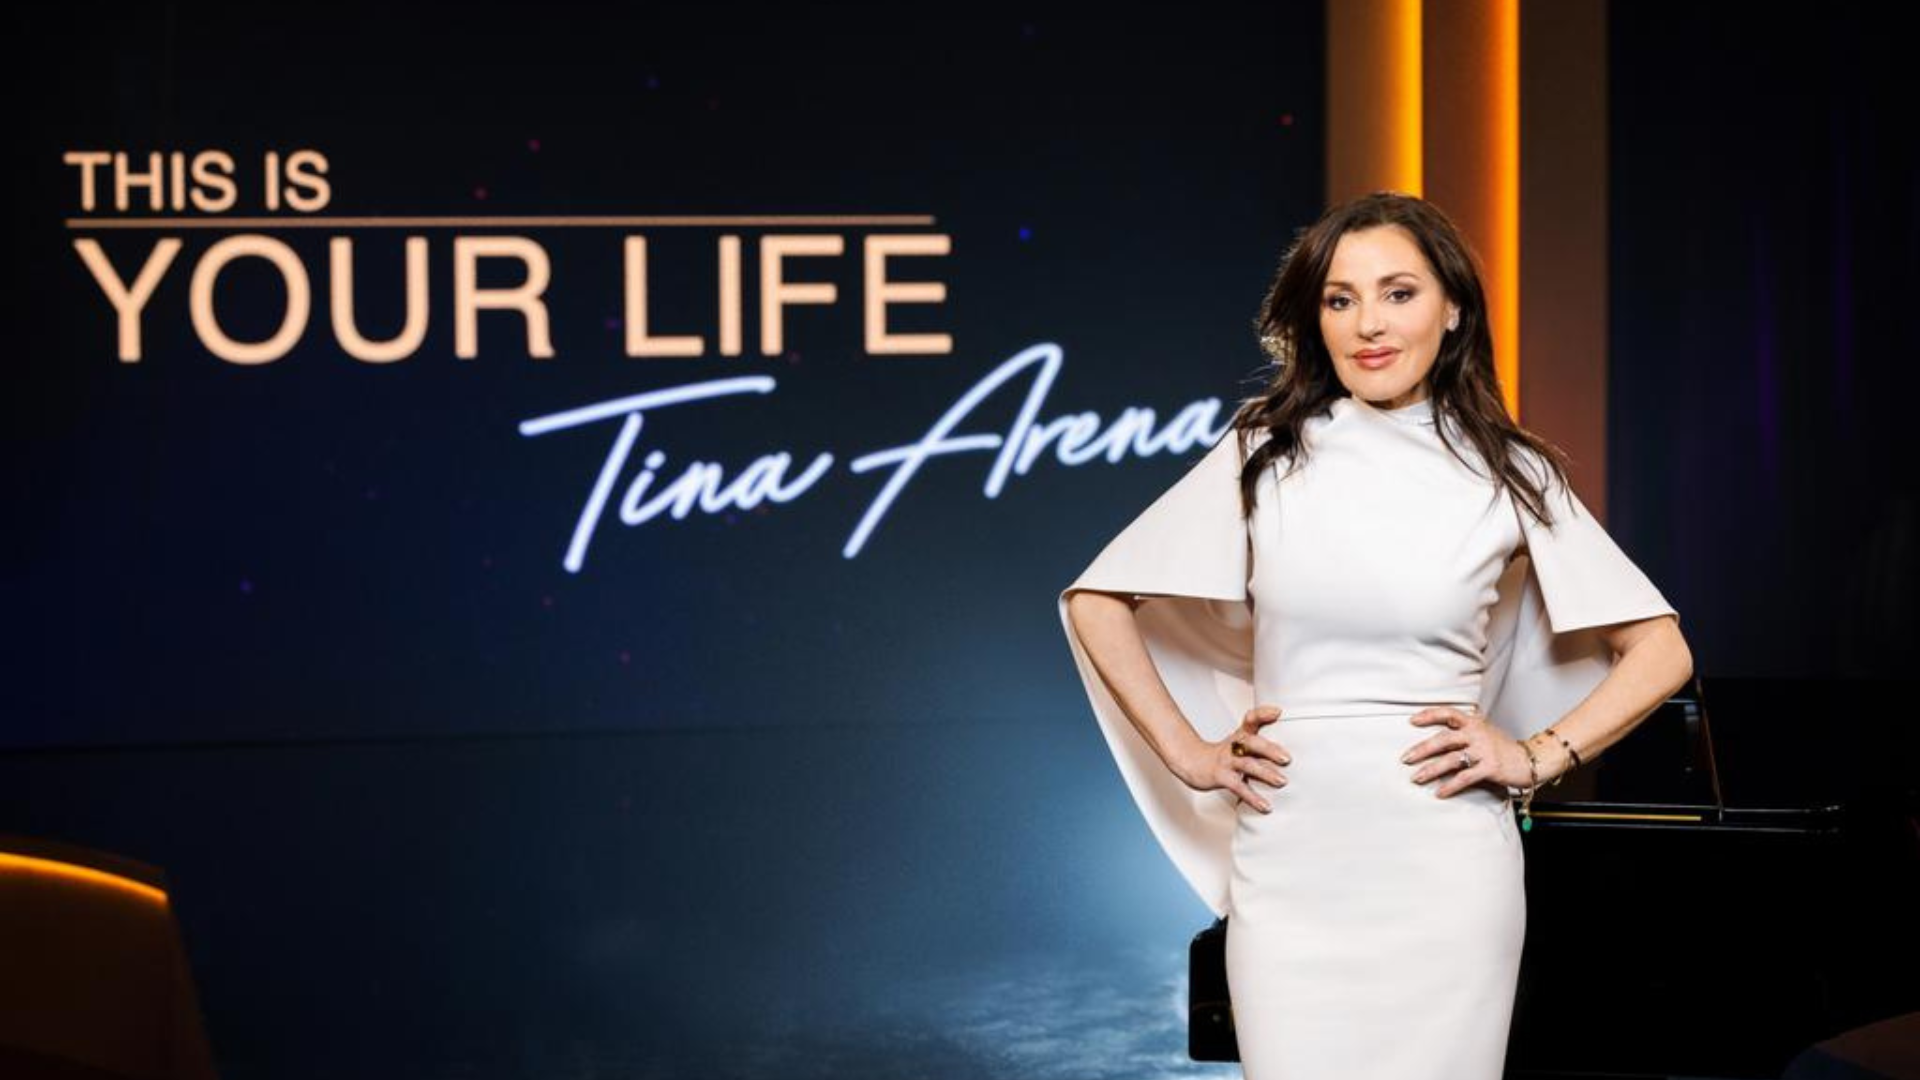 Tina Arena to be celebrated with ‘This Is Your Life’ special RETROPOP